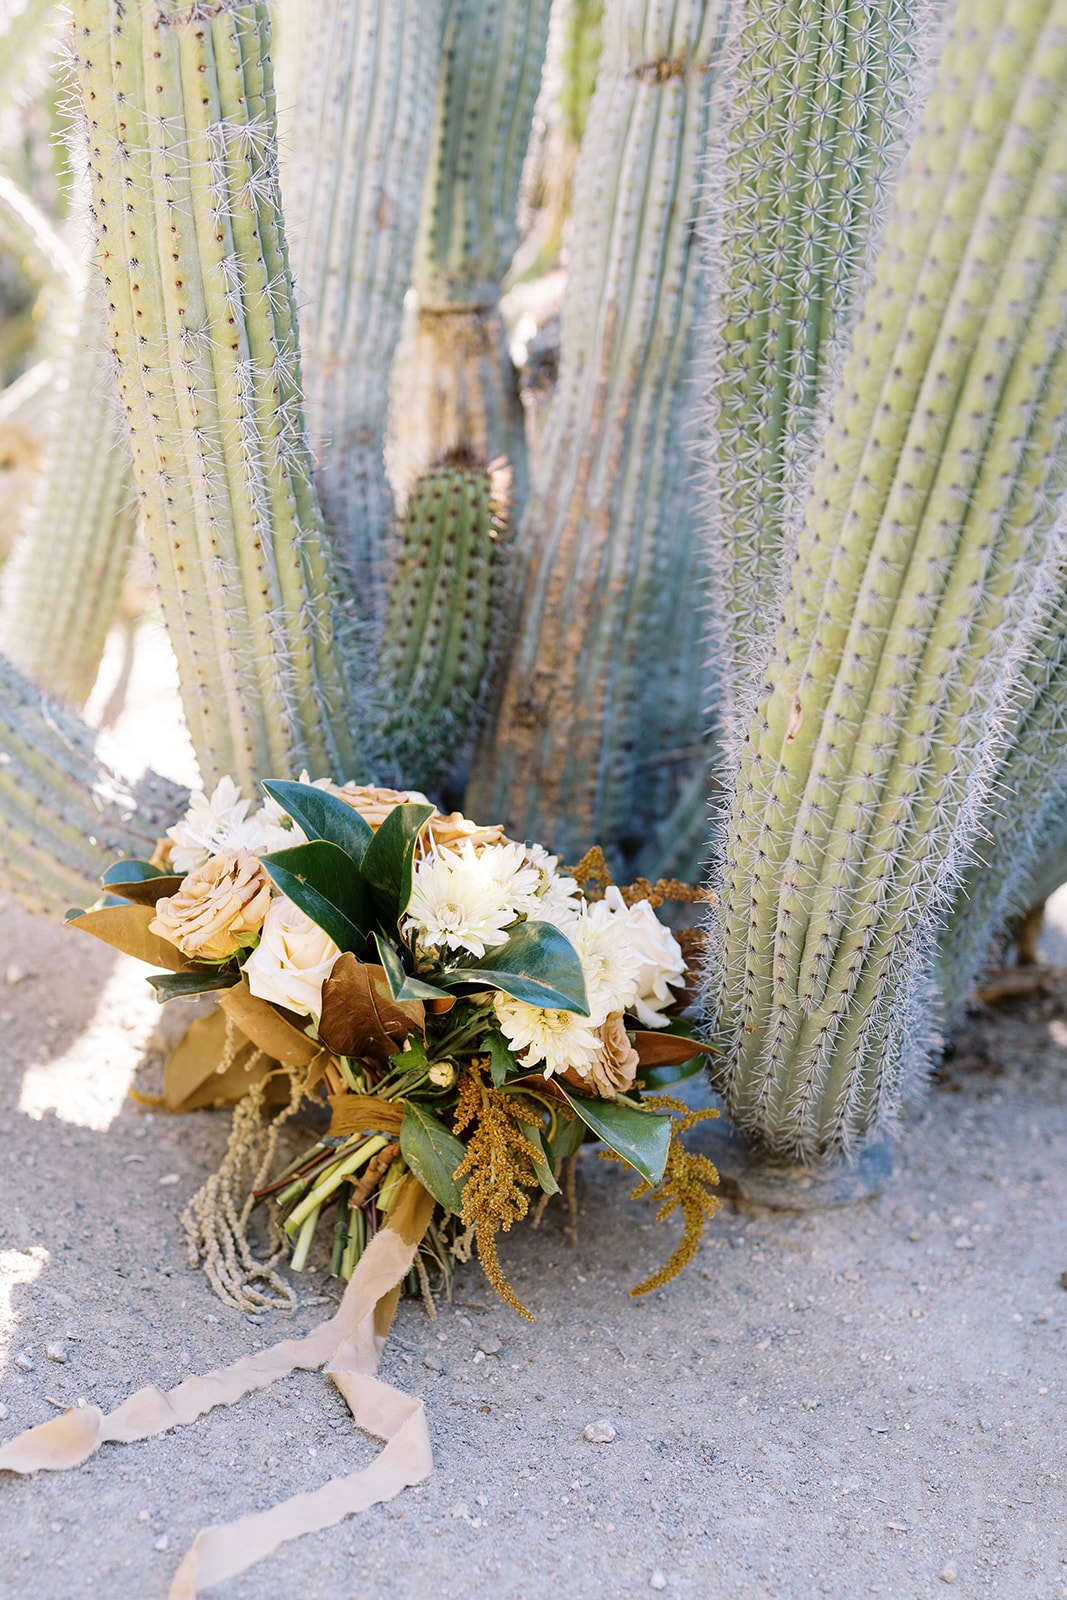 Wedding bouquet laid down at the bottom of cactus. Bouquet has natural colored flowers perfect for a desert elopement. Elopement photographer in Texas